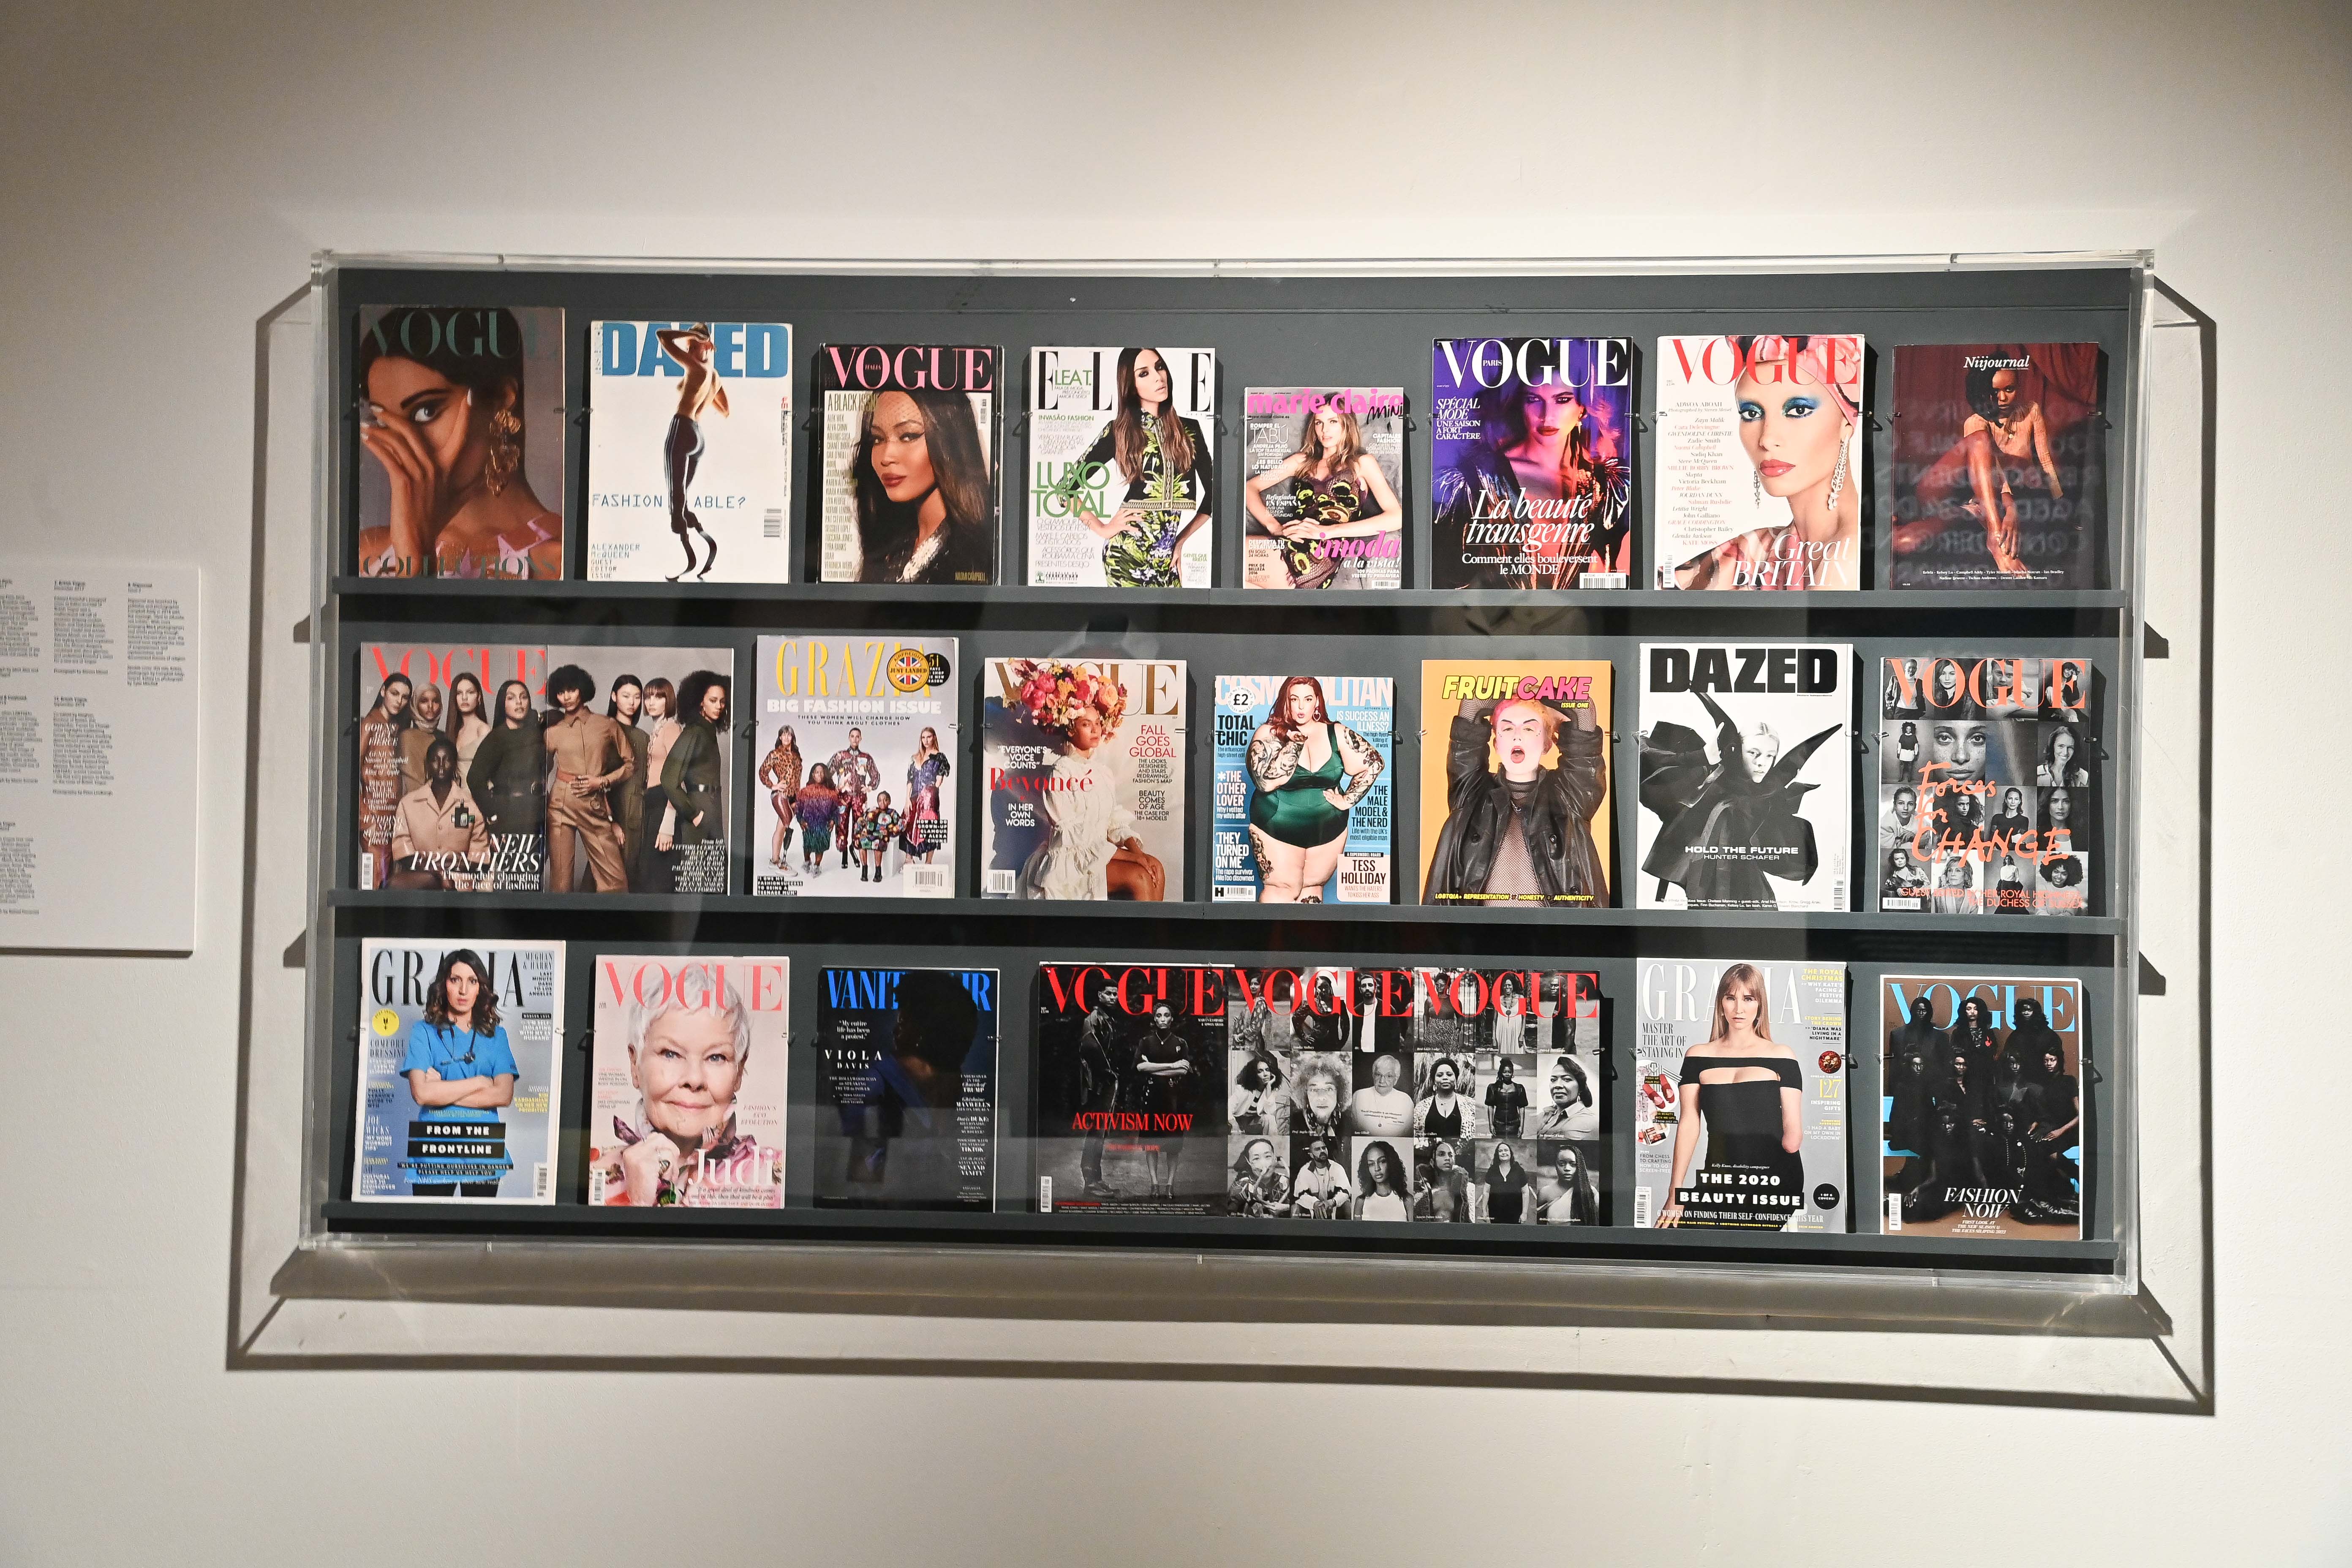 Twenty one copies of Vogue are lined on shelves within an exhibition display.